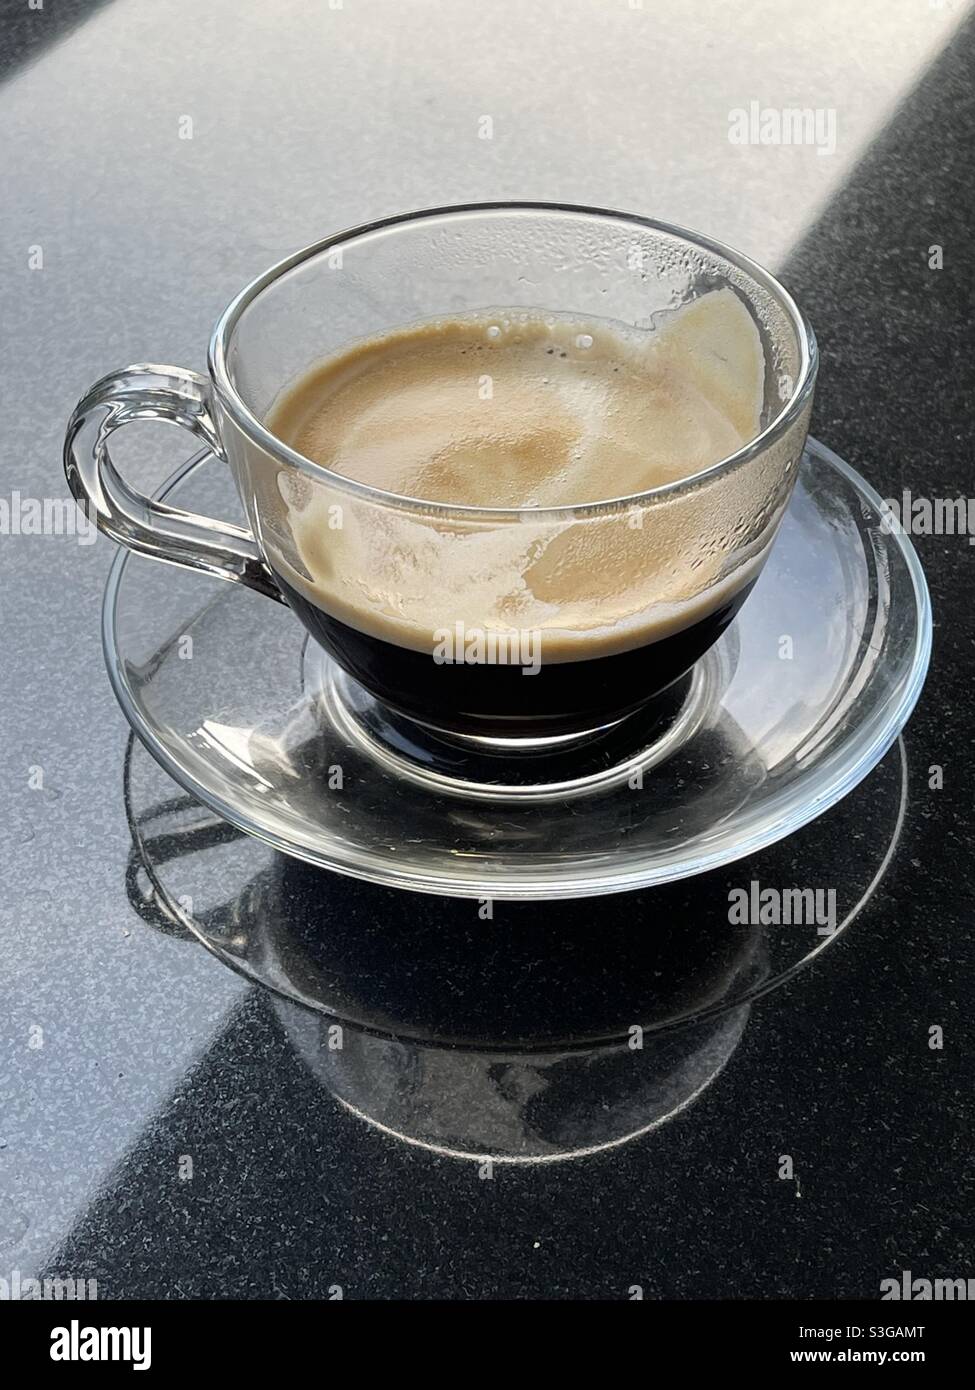 half-full cup of coffee Stock Photo